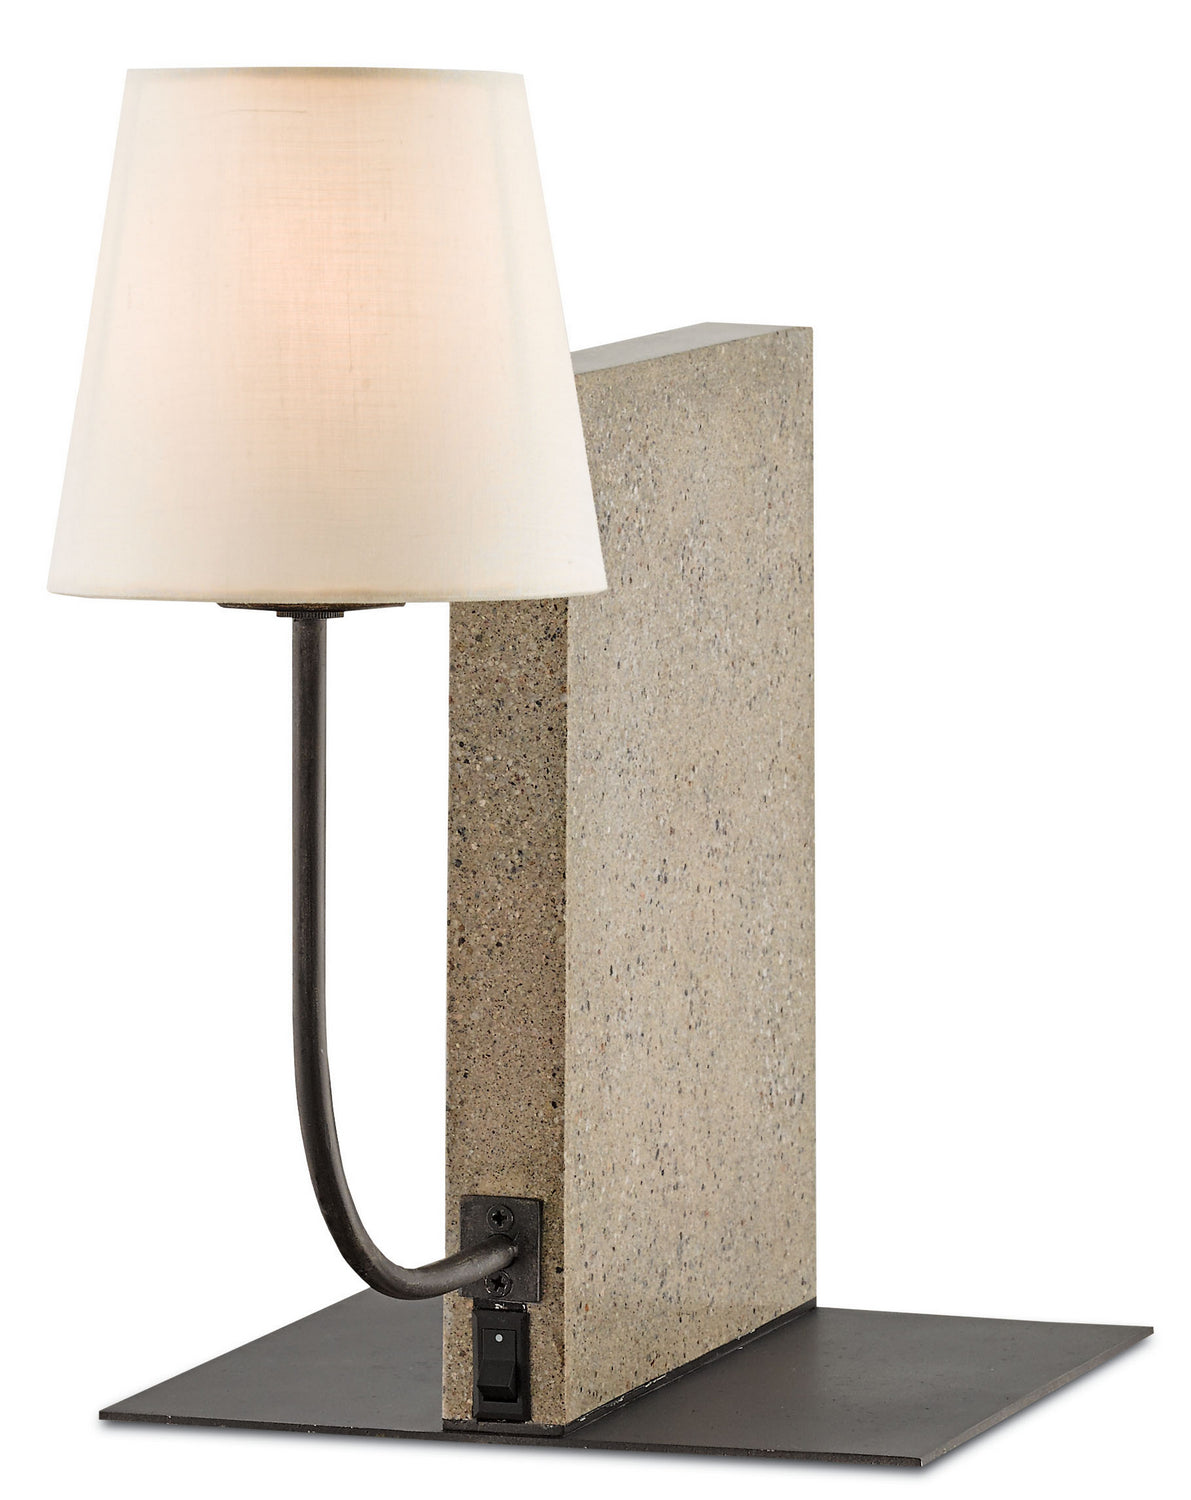 Currey and Company - One Light Table Lamp - Oldknow - Polished Concrete/Aged Steel- Union Lighting Luminaires Decor